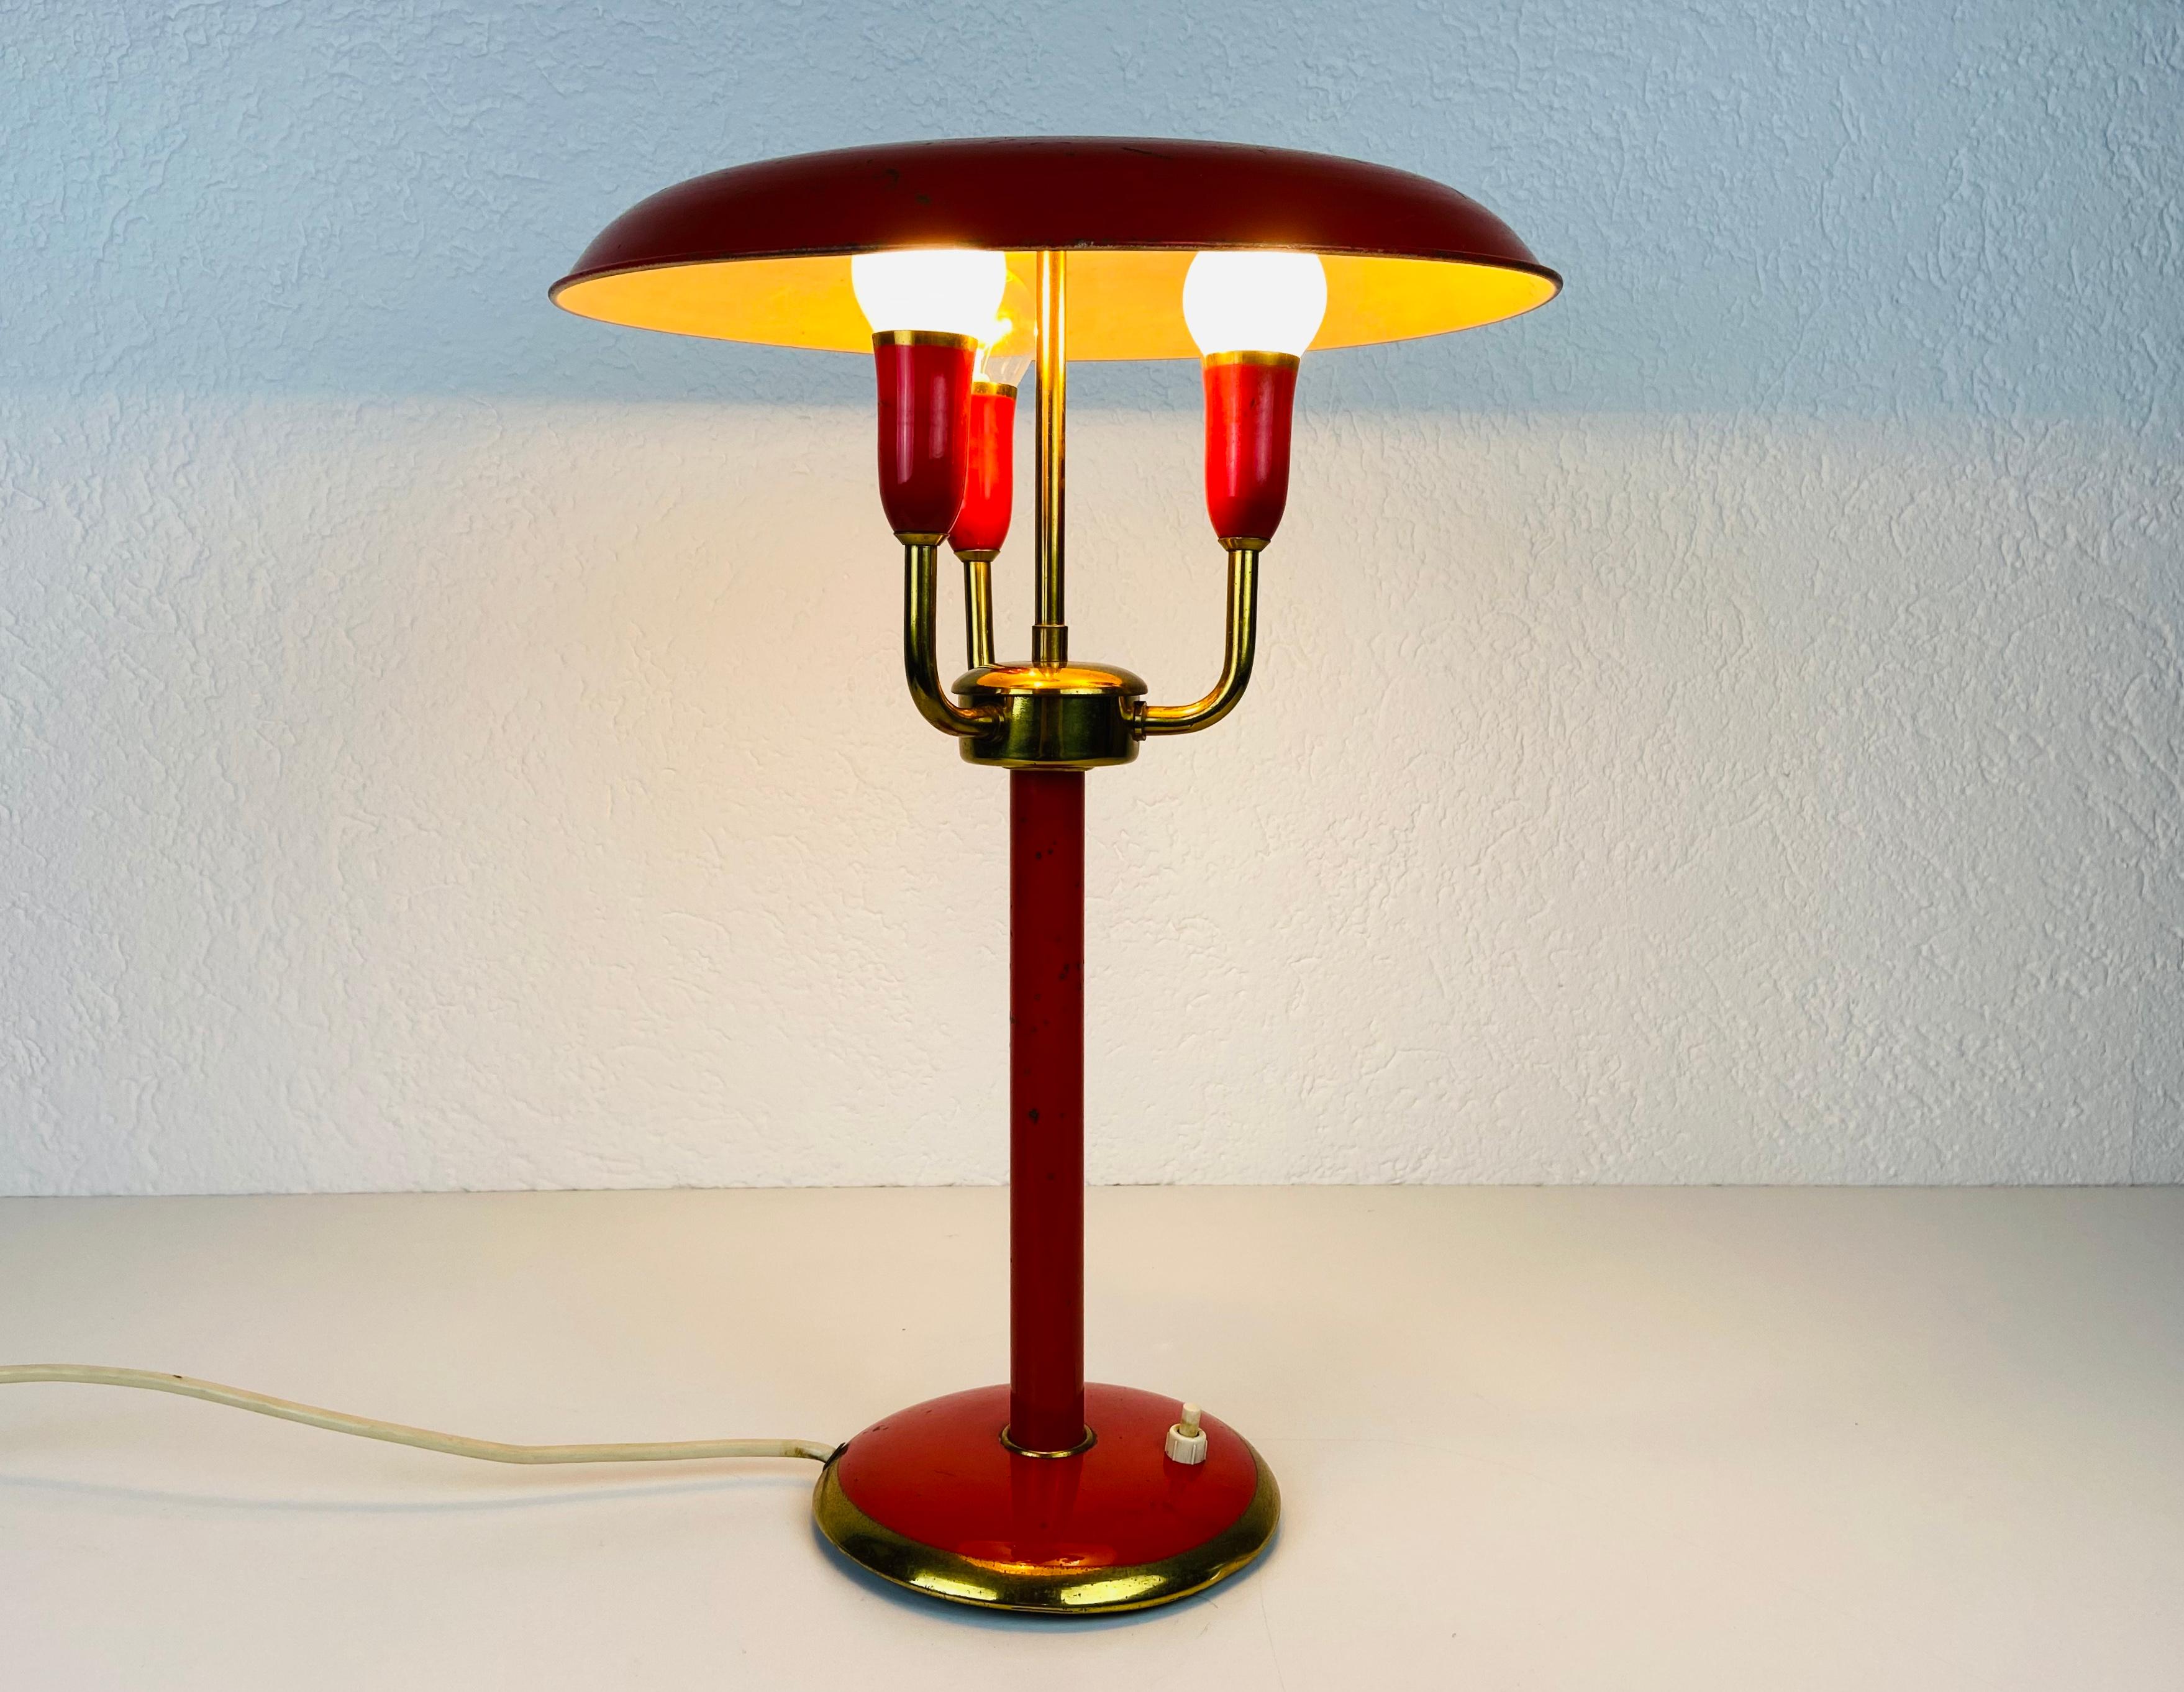 An Italian table lamp made in the 1960s. Made of metal and brass. The lighting has an exceptional design with 3 arms.

The light requires three E14 light bulbs. Works with both 120/220V. Good vintage condition.

Free worldwide express shipping.